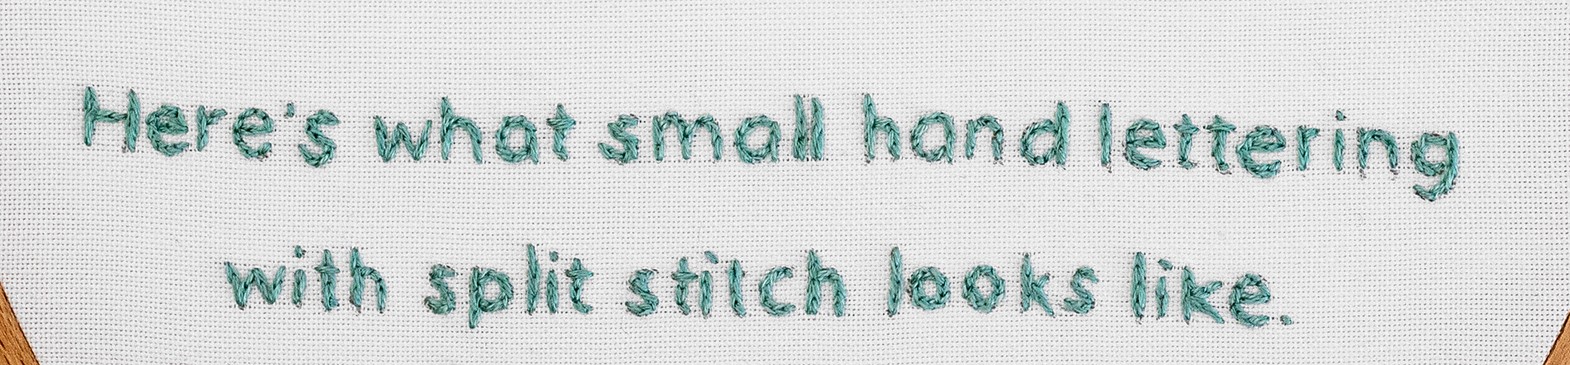 This is an image of the word 'Harley' stitched with split stitch.